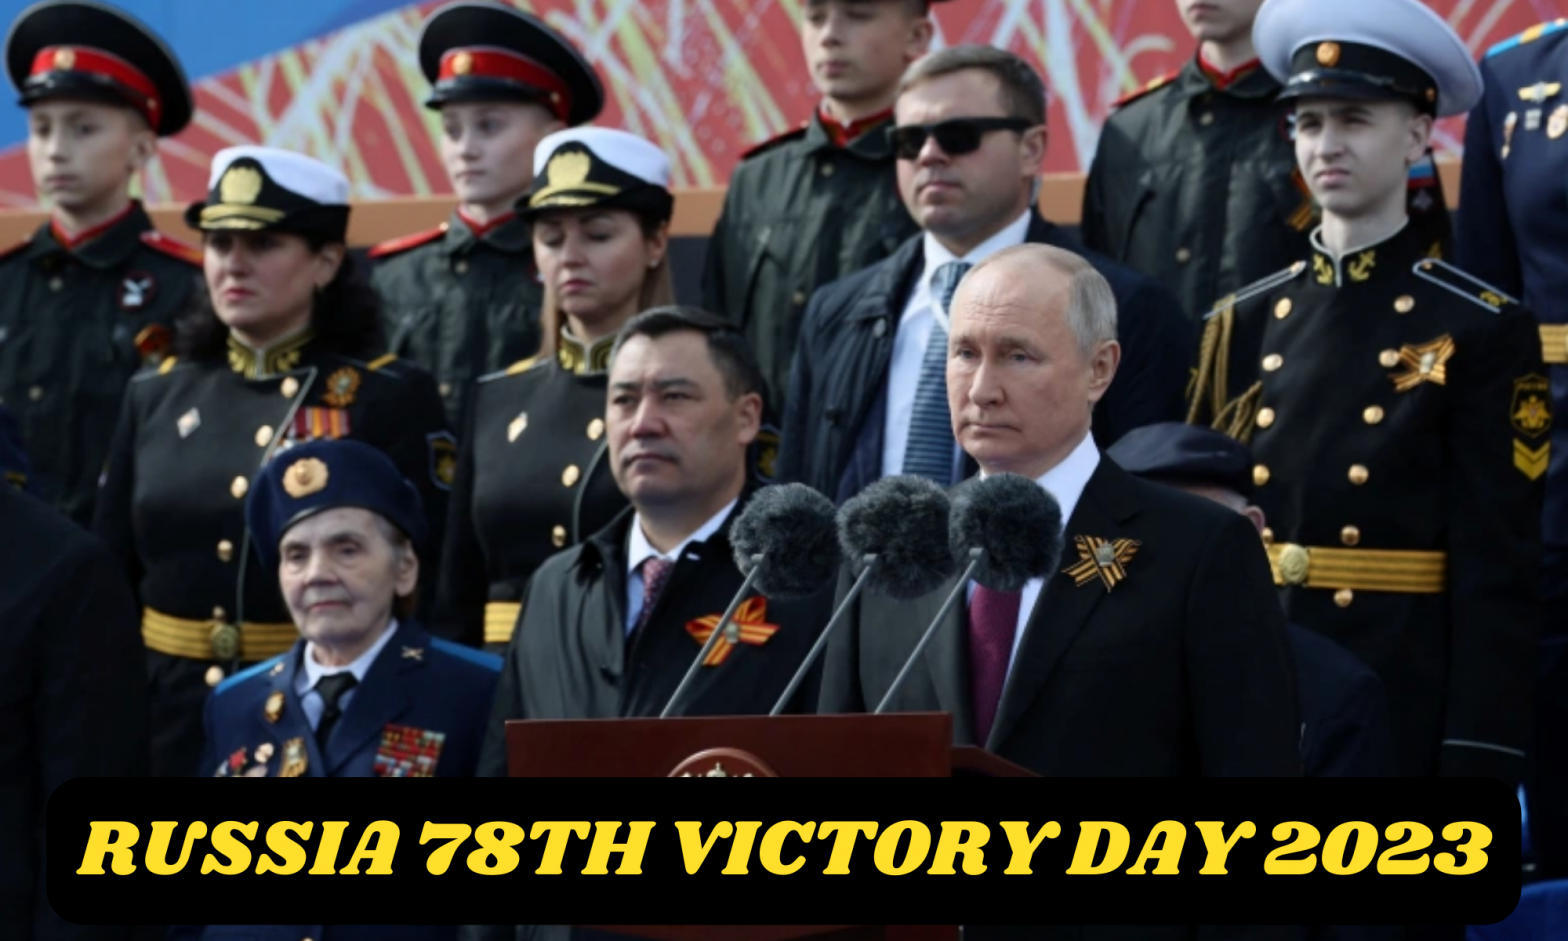 Russia 78th Victory Day 2023